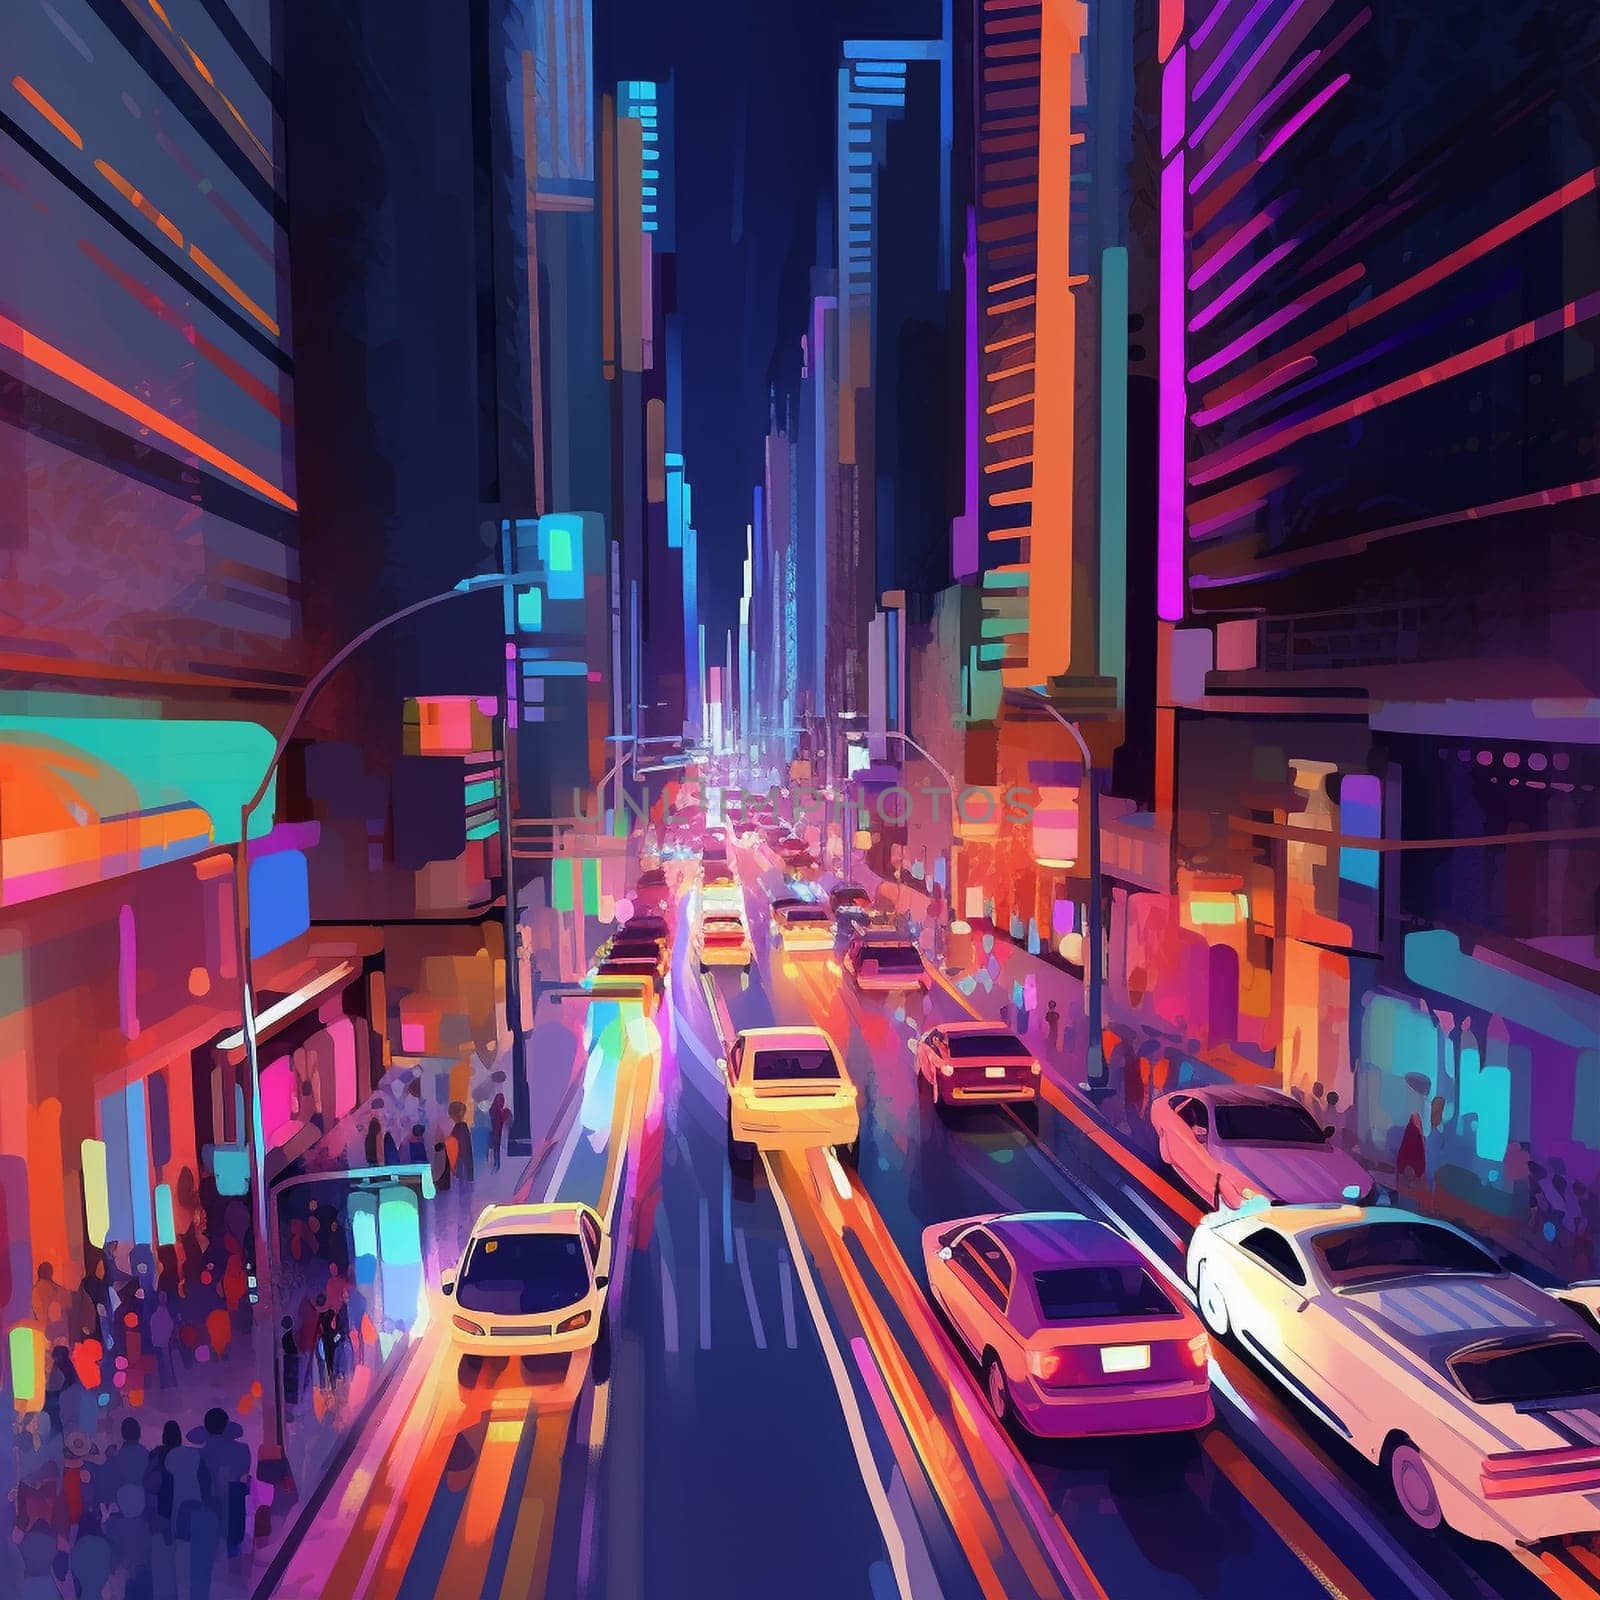 Get ready to experience the energy and excitement of the city with this exciting, vibrant cityscape featuring a sense of movement. Skyscrapers, streets, and other urban features are set against bright lights and bold colors. There's a sense of dynamism and excitement as people and vehicles move through the scene, creating a feeling of life and vibrancy.